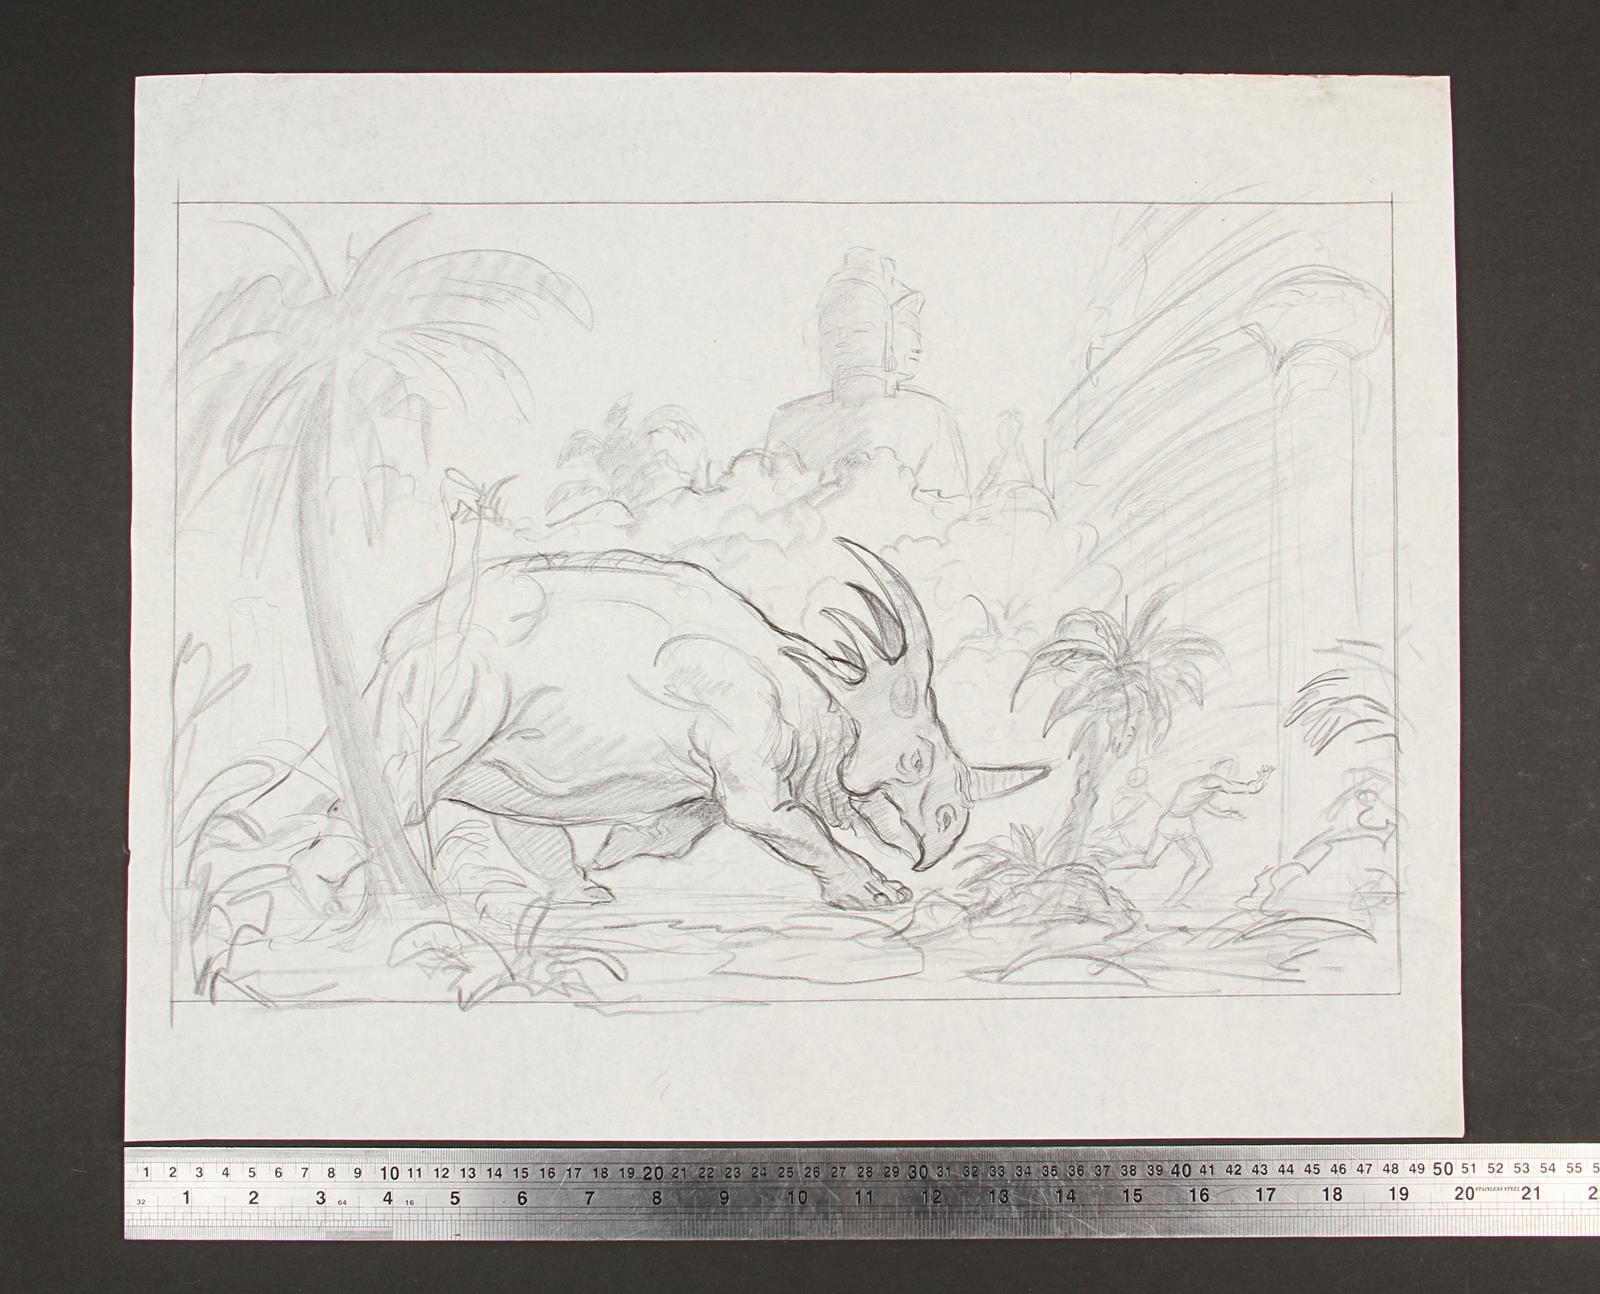 KING OF THE GENIIS (1973) - Ray Harryhausen Hand-Drawn Concept Of The Charging Styracosaurus A - Image 5 of 5